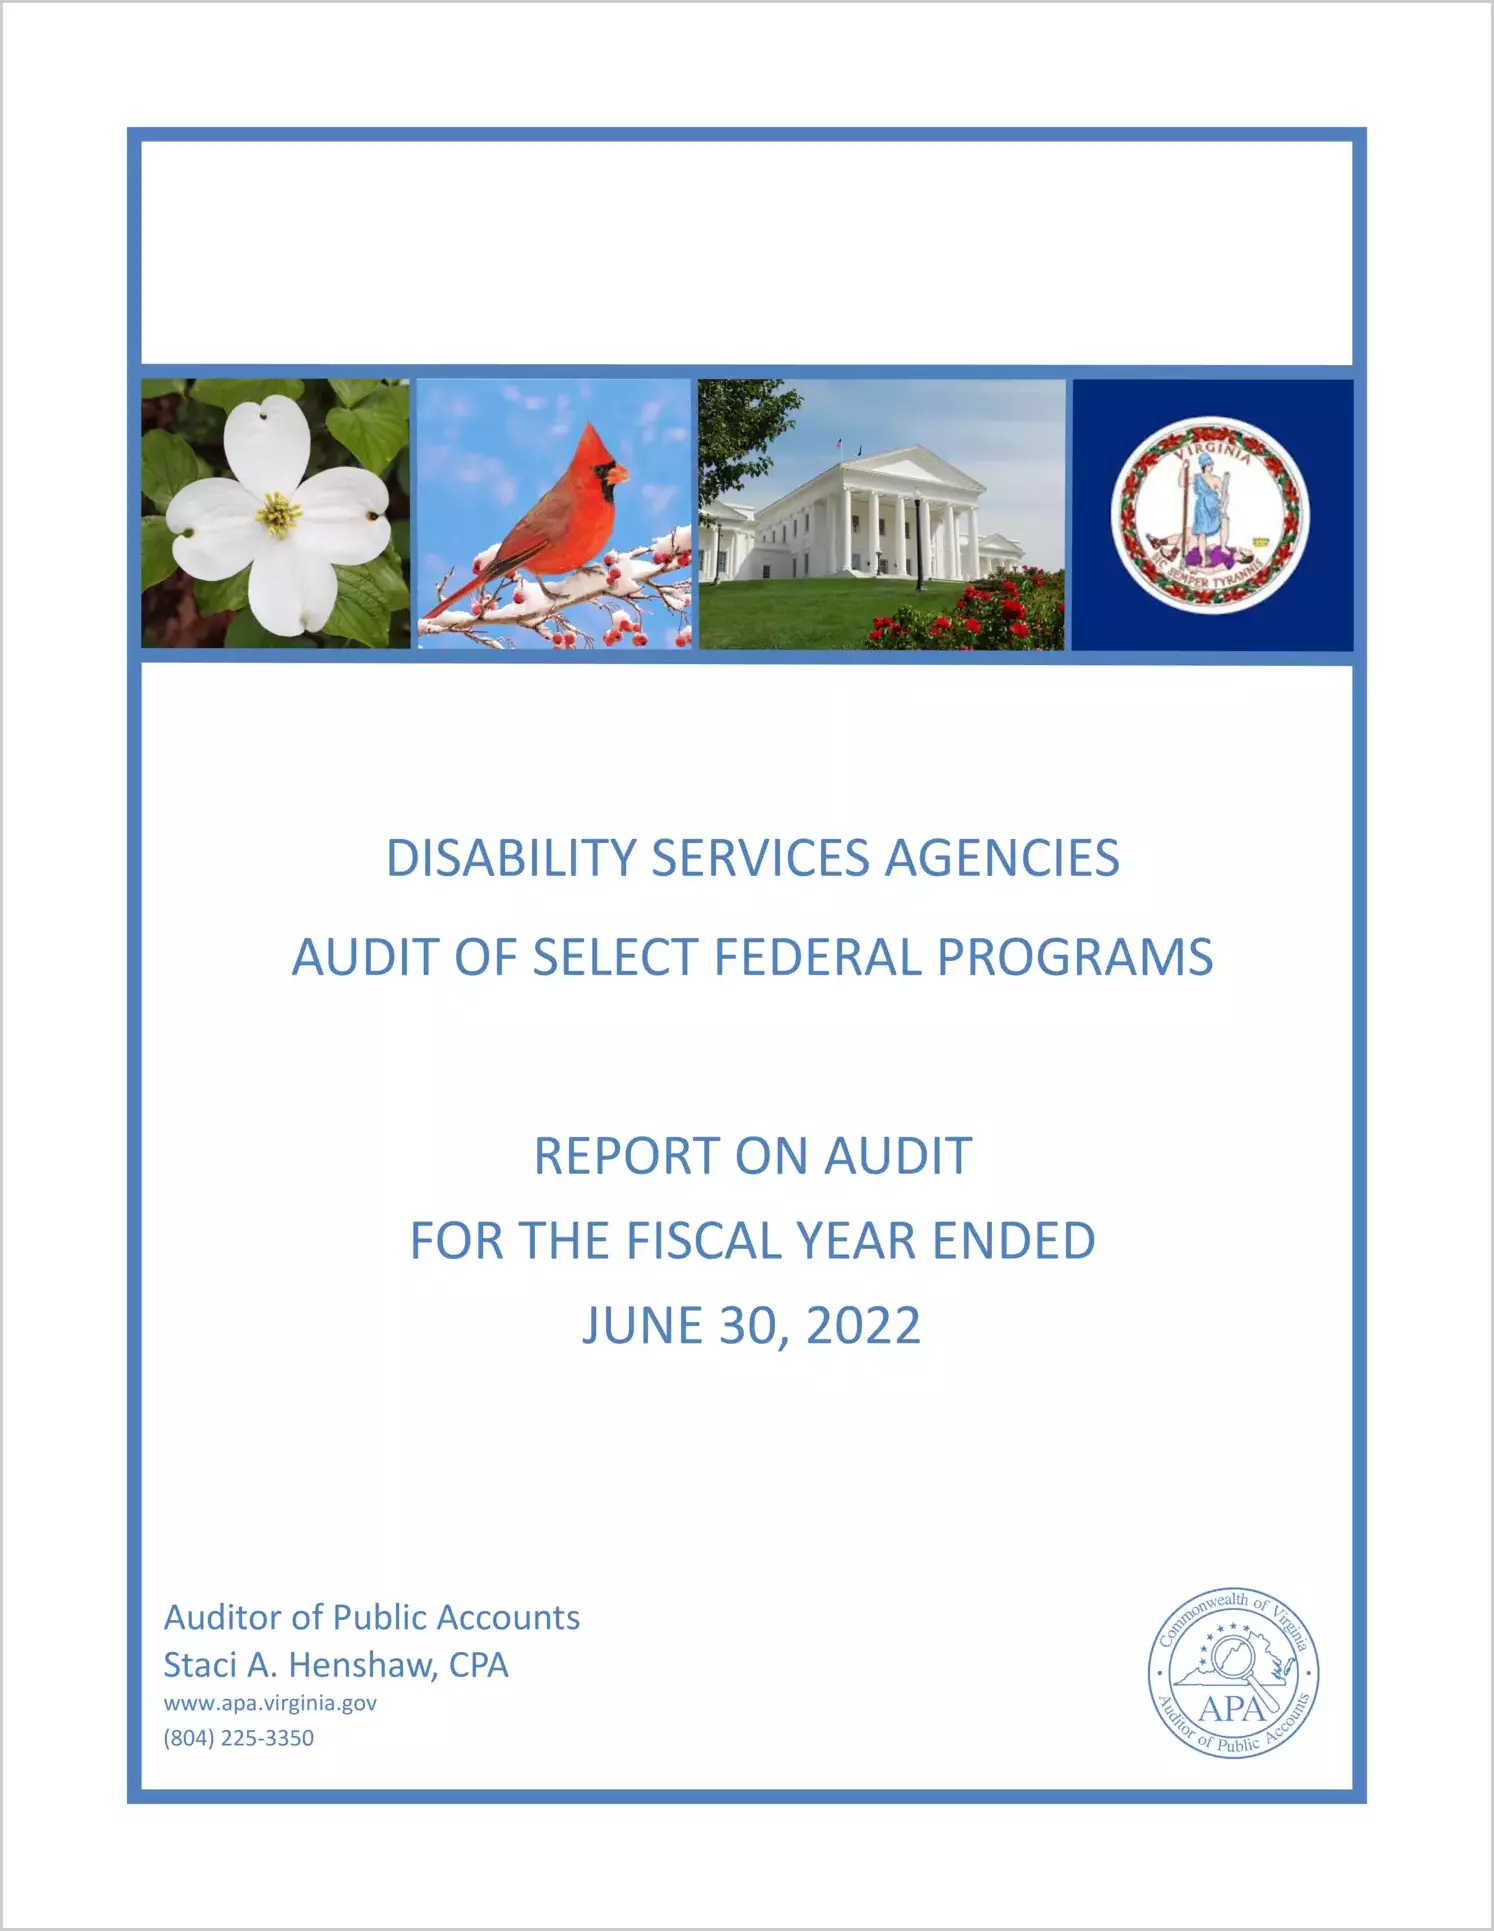 Disability Services Agencies Audit of Select Federal Programs for the fiscal year ended June 30, 2022